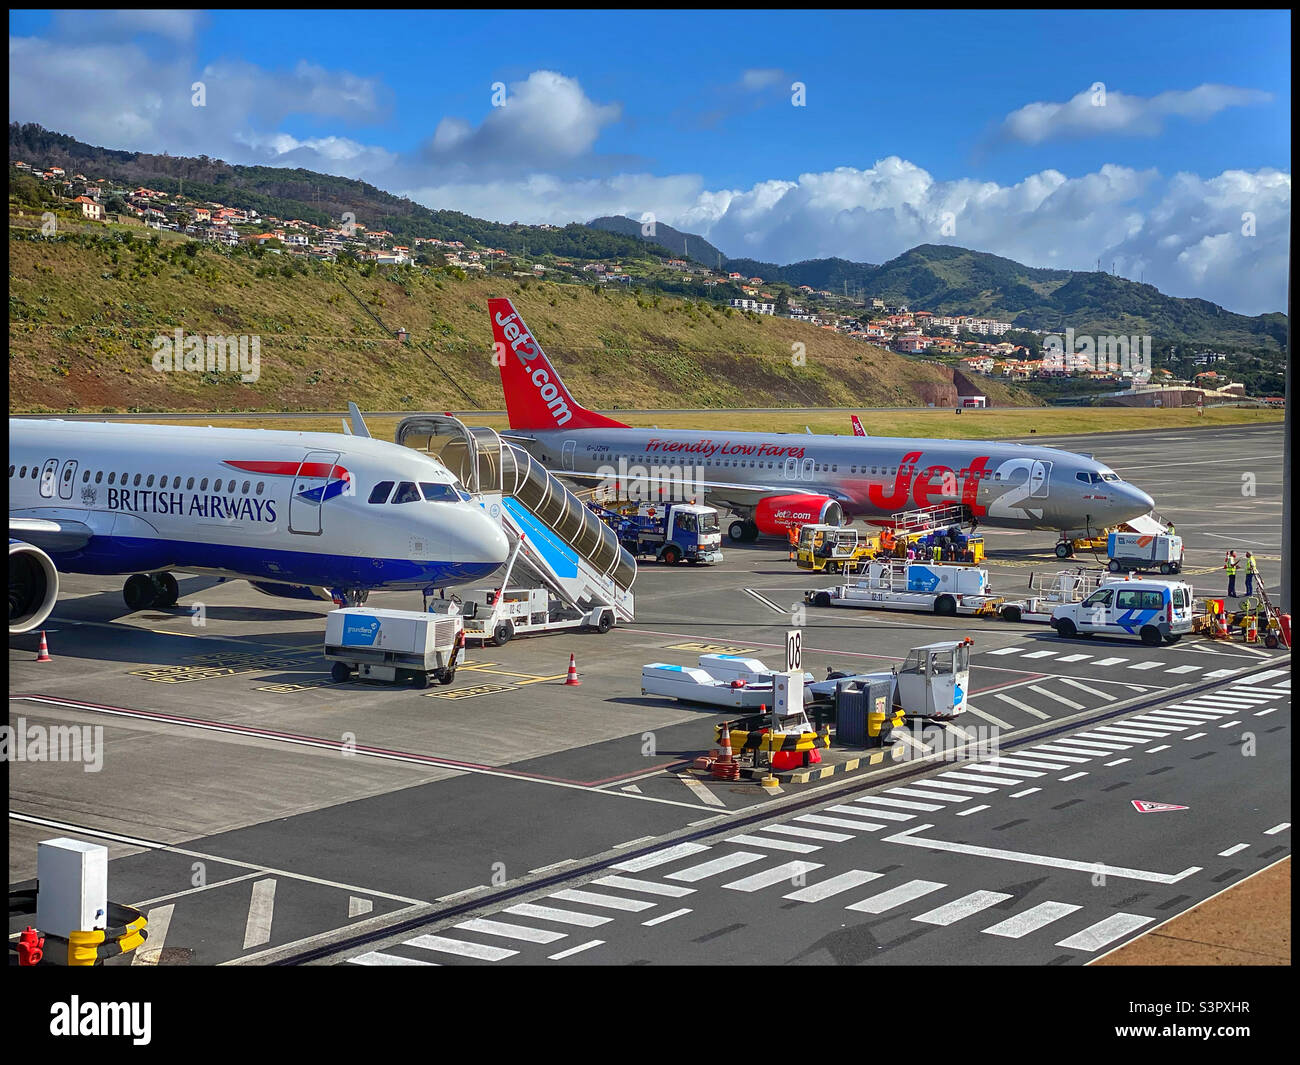 A British Airways aircraft and a Jet2 aircraft at Funchal International Airport (Cristiano Ronaldo International Airport) in Madeira. Both aircraft are offloading and awaiting returning to the UK. Stock Photo